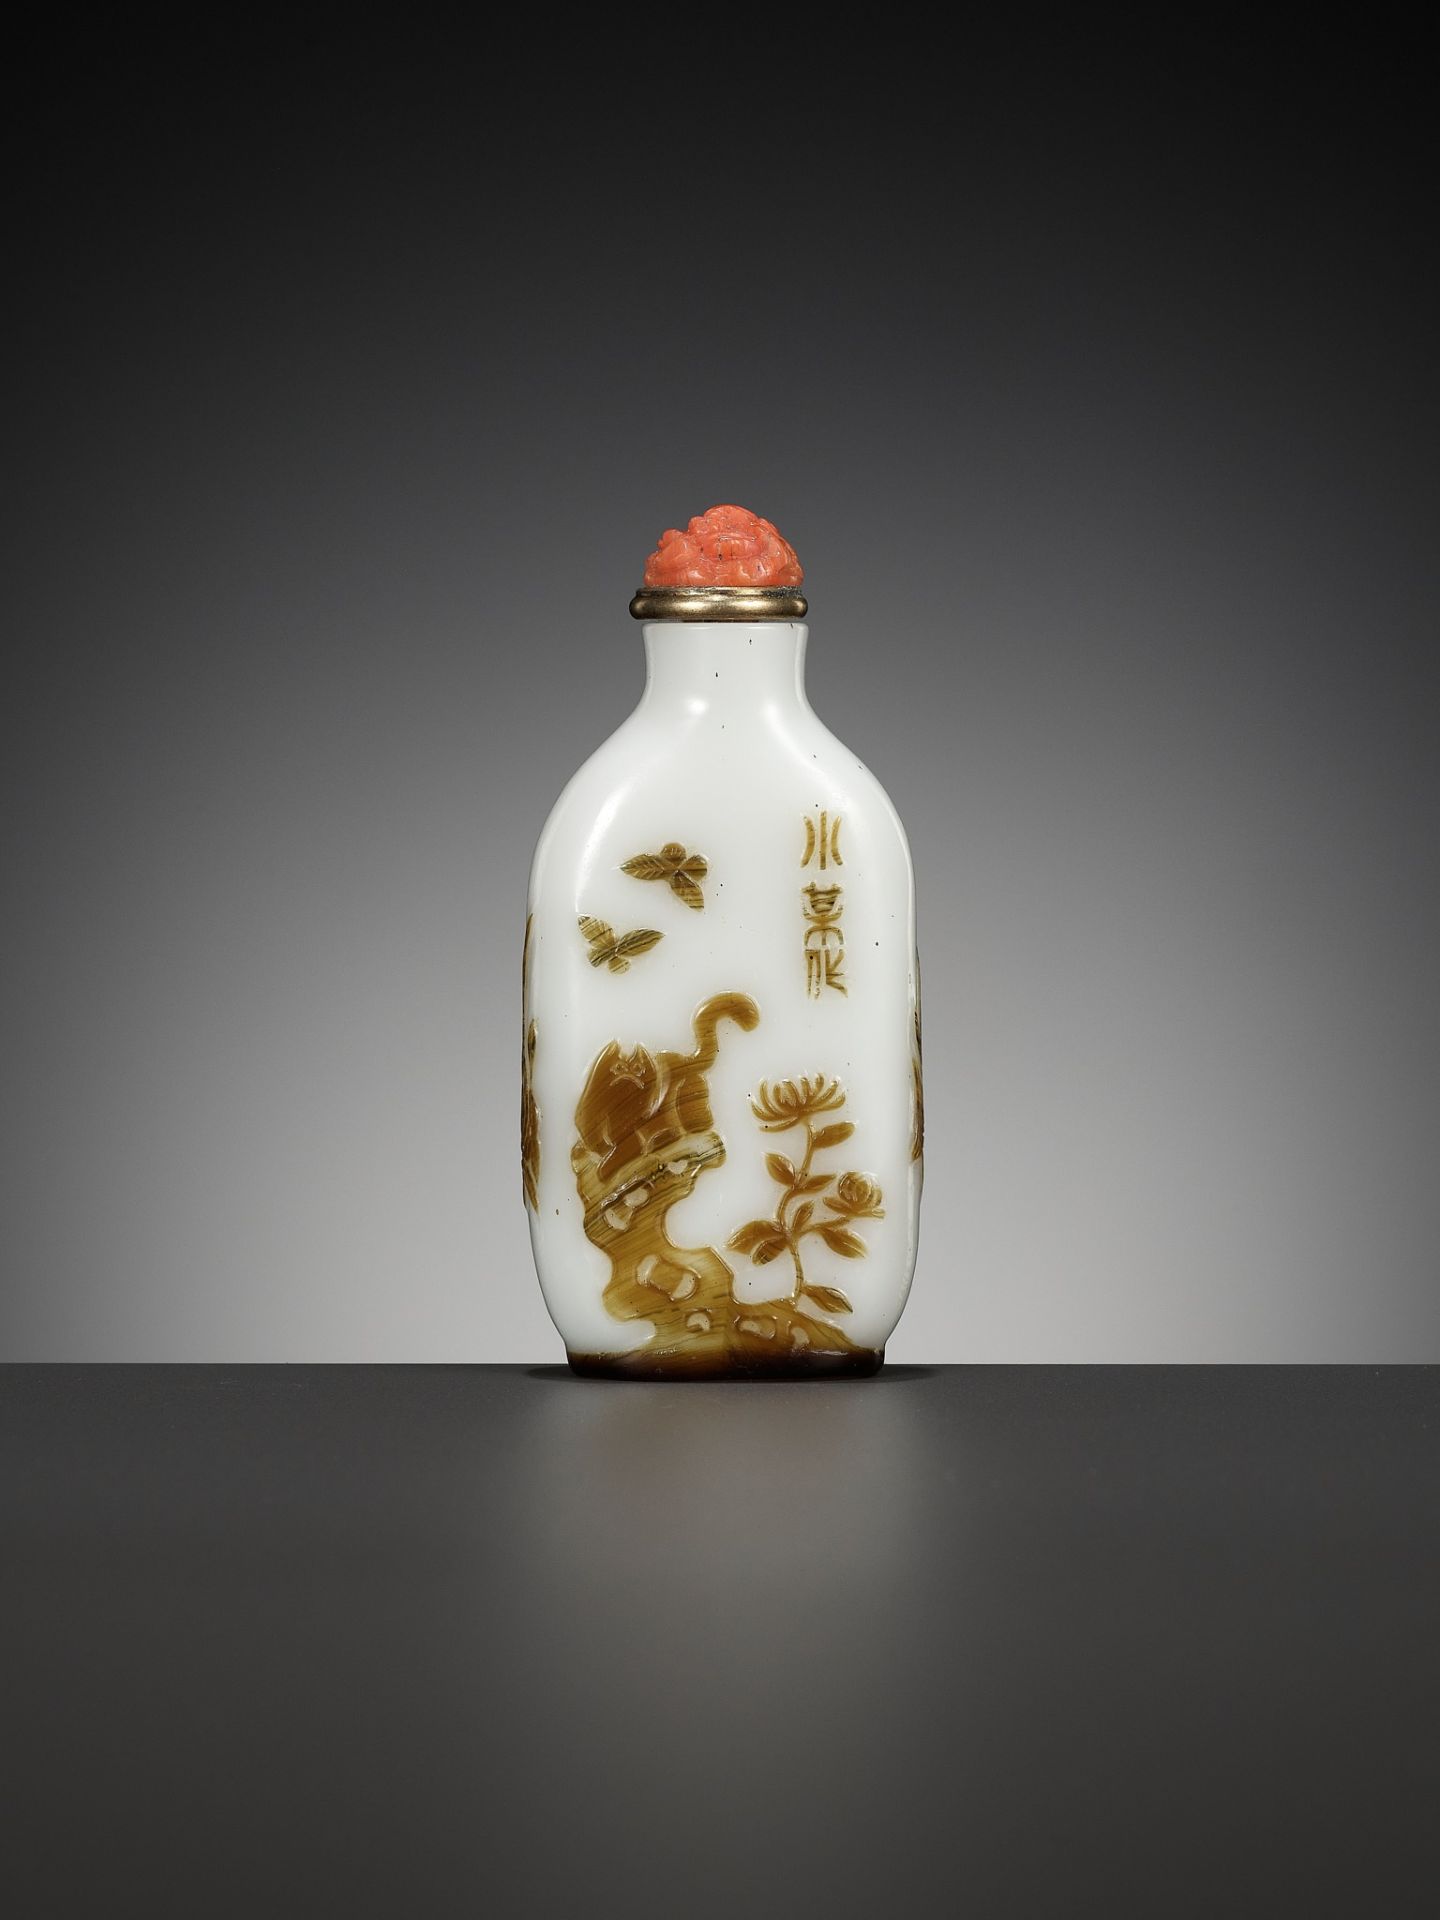 AN INSCRIBED OVERLAY GLASS ‘CAT AND BUTTERFLY’ SNUFF BOTTLE, BY WANG SU, YANGZHOU SCHOOL, 1820-1840 - Image 15 of 19